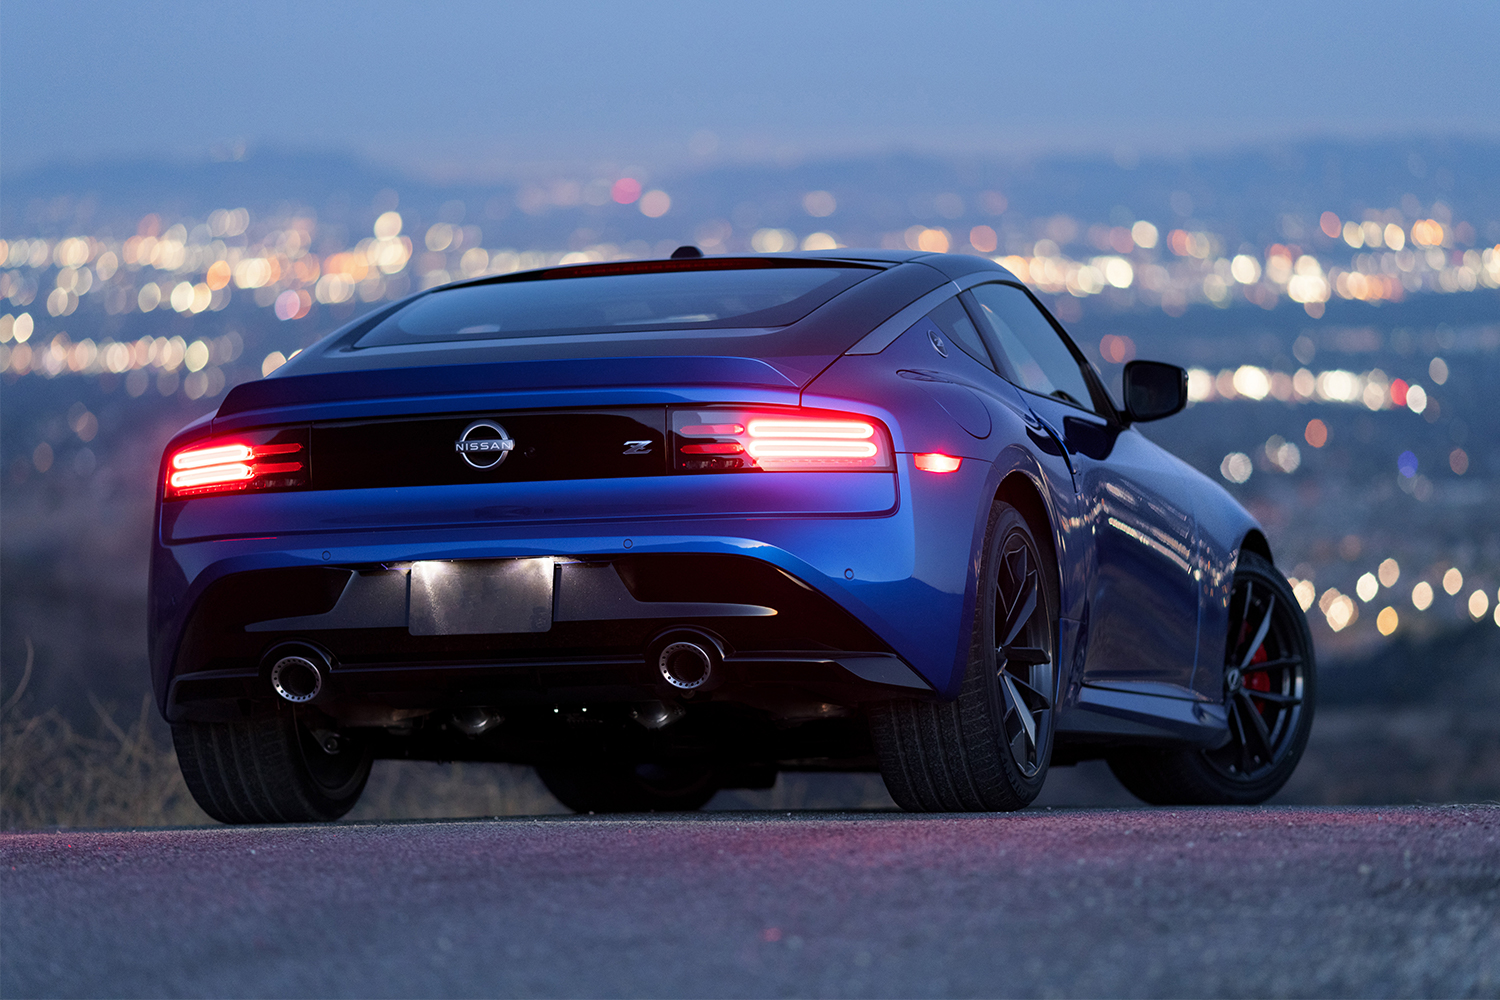 The rear end of the new 2023 Nissan Z sports car, in blue, shown here with the red taillights illuminated at dusk